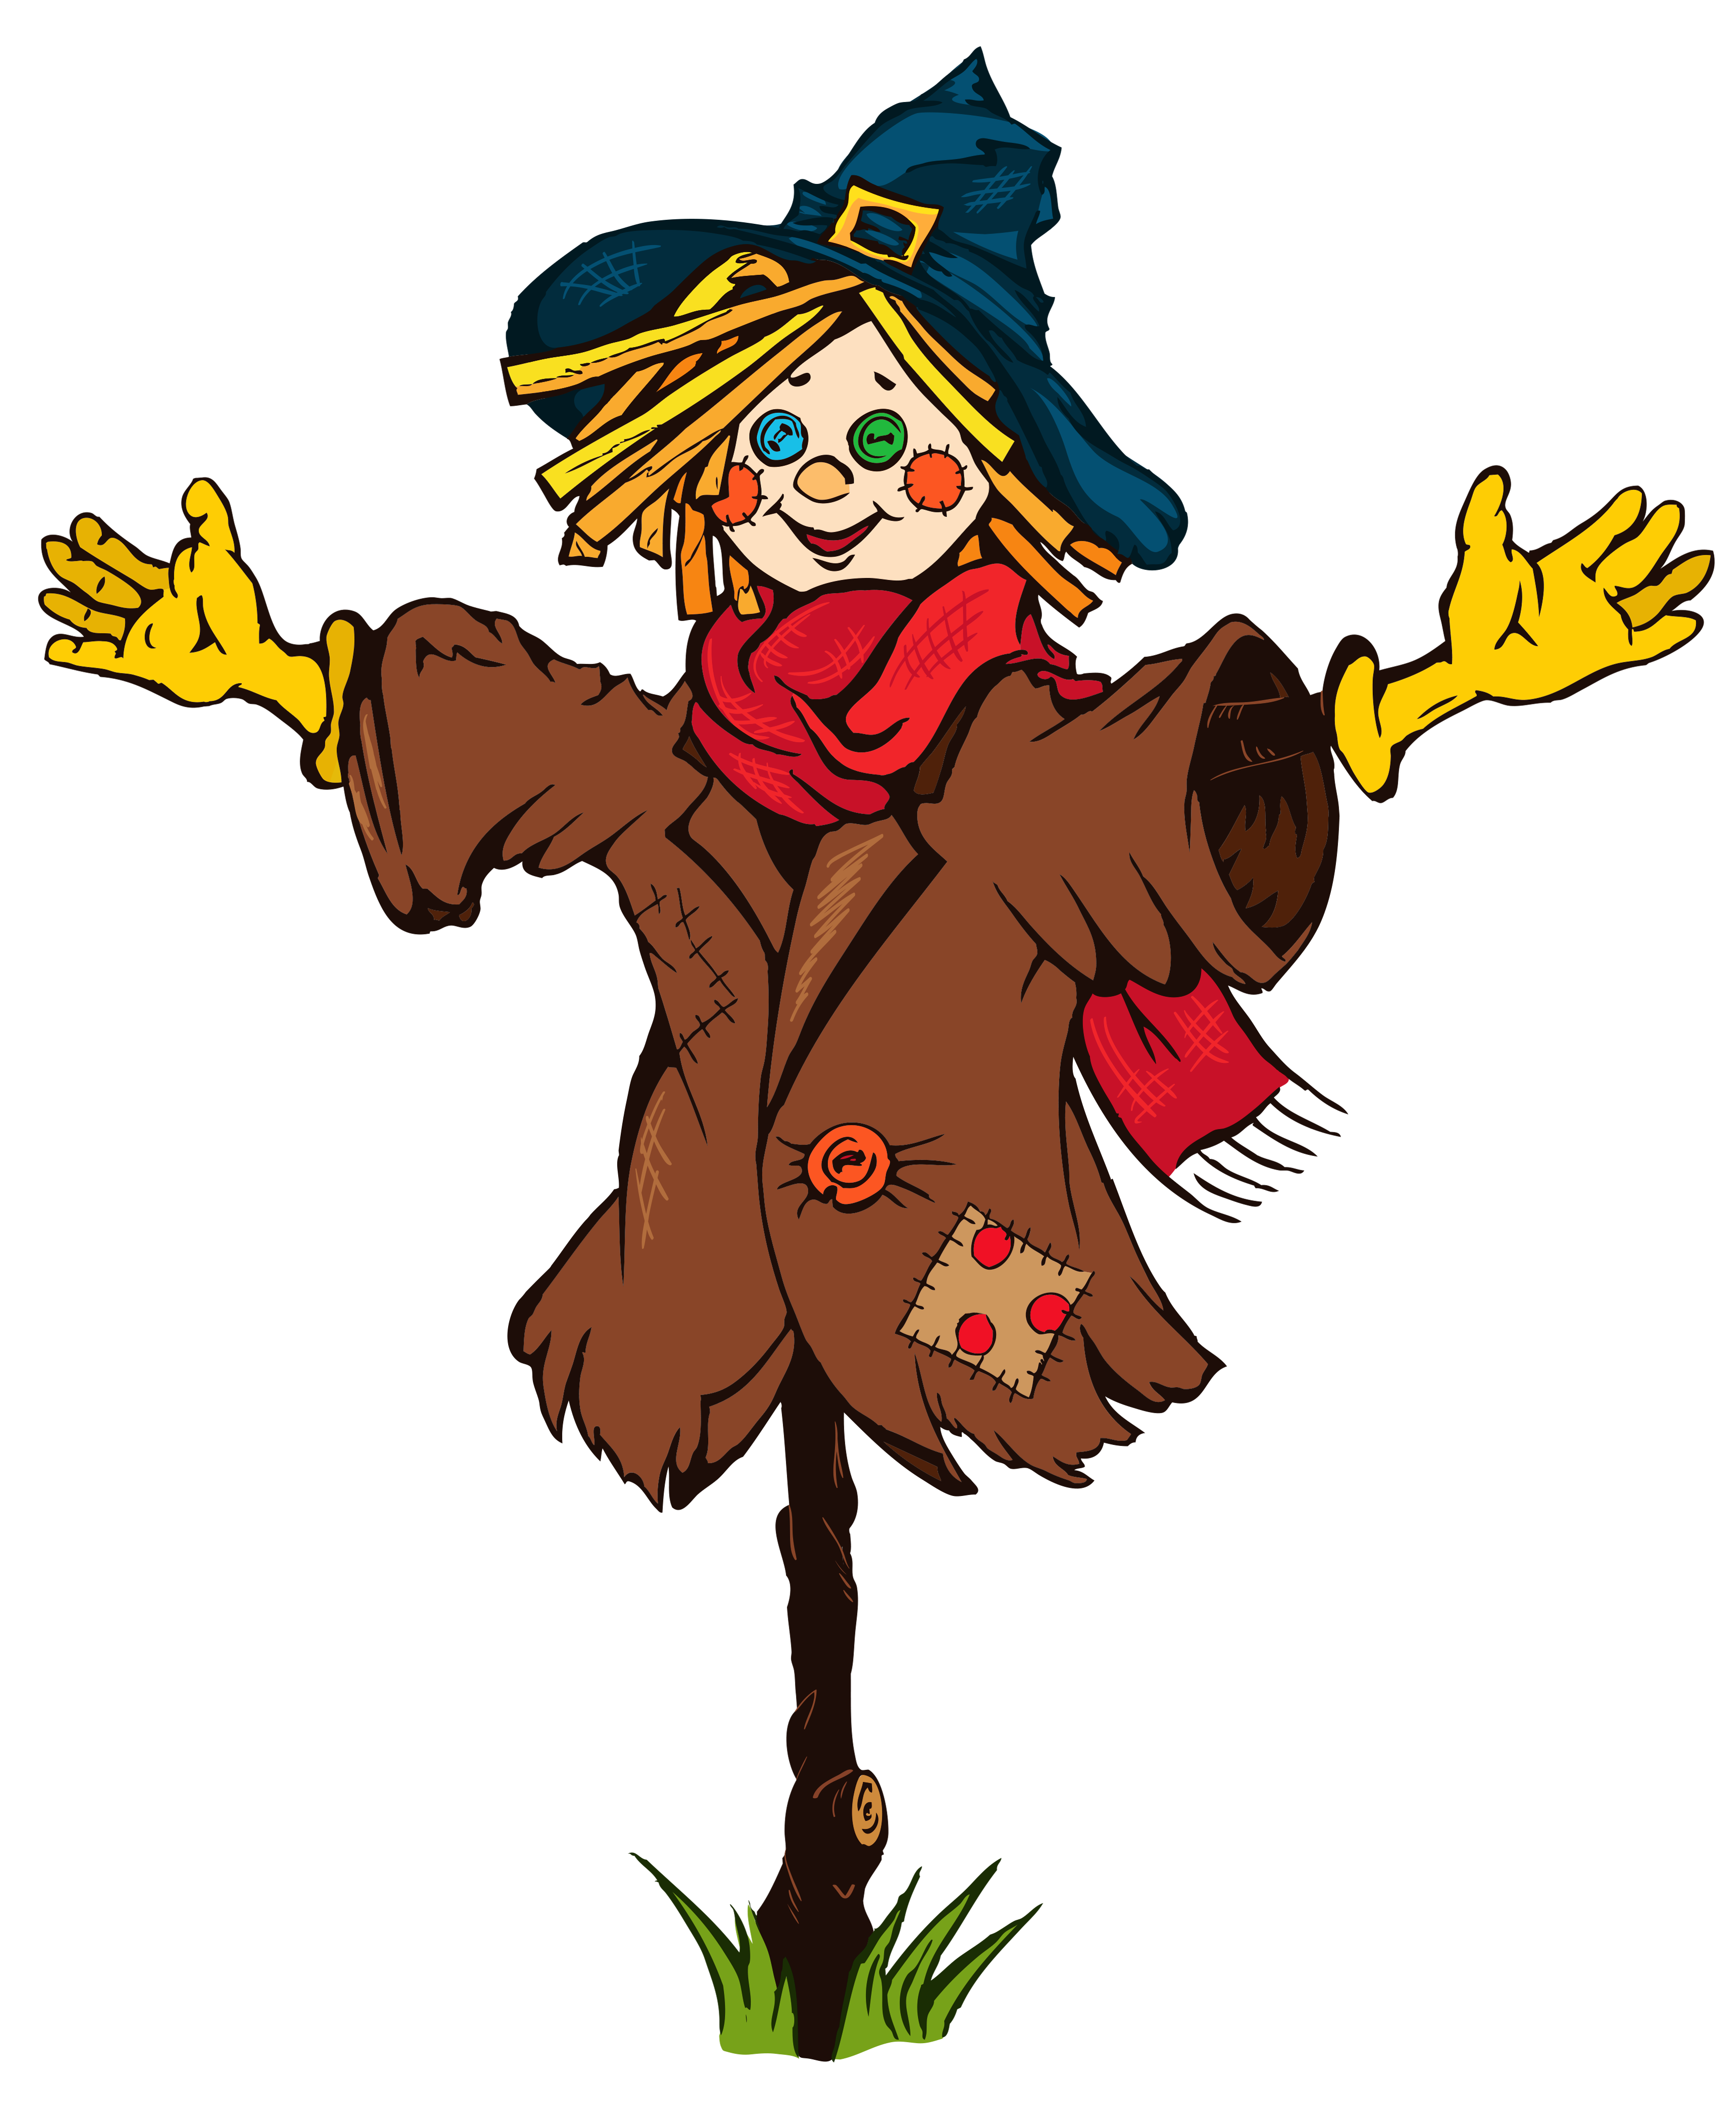 Clip Arts Related To : cute scarecrow clipart. view all scarecrow-clipart)....